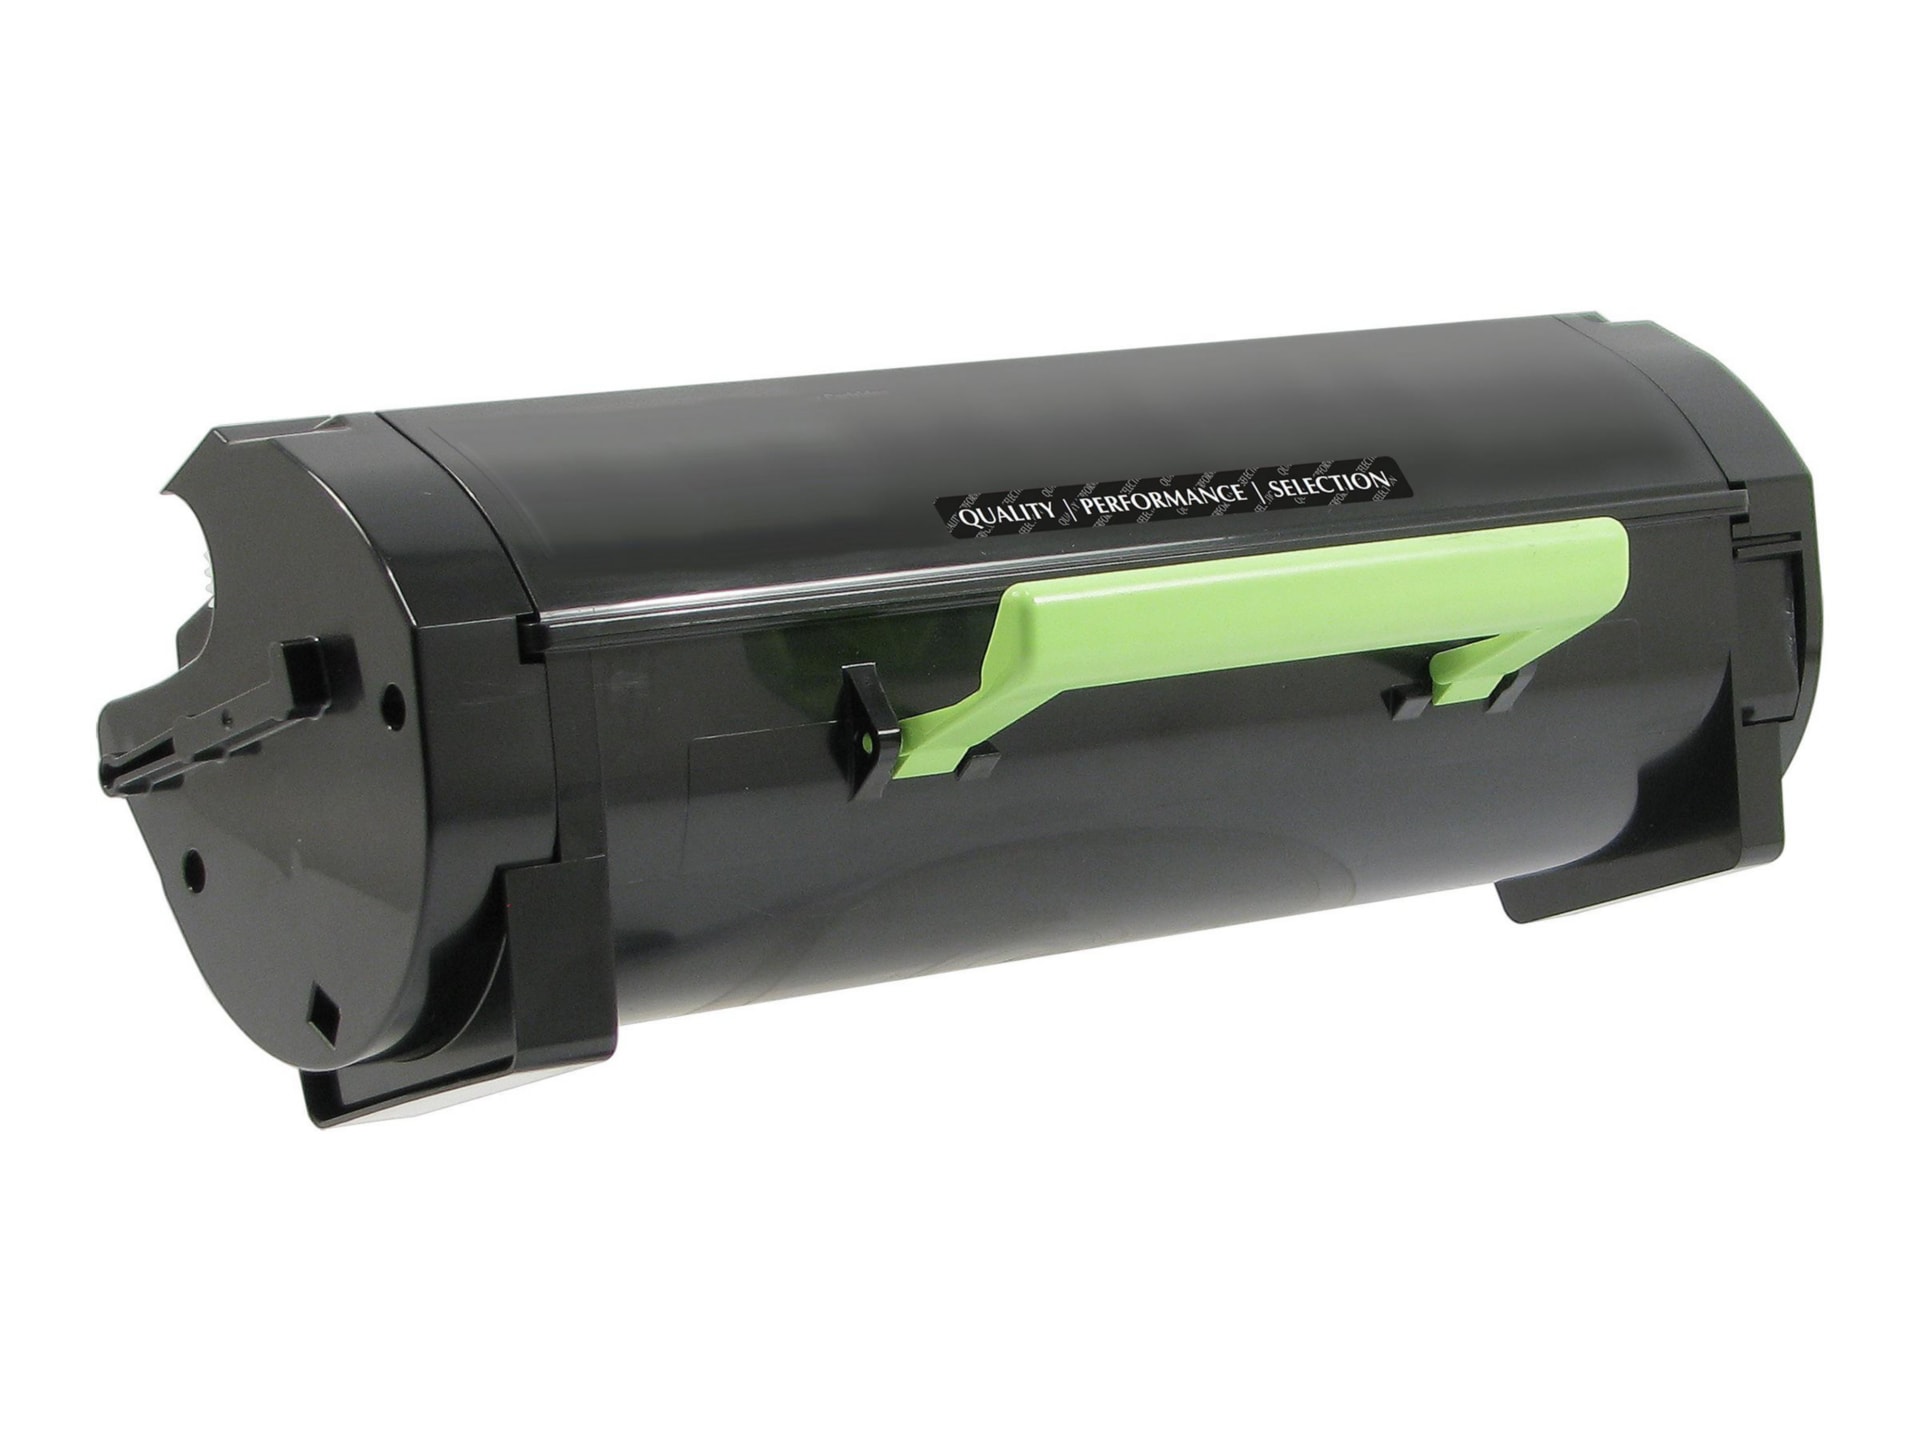 Clover Remanufactured Toner for Lexmark MS417/517, Black, 8,500 page yield